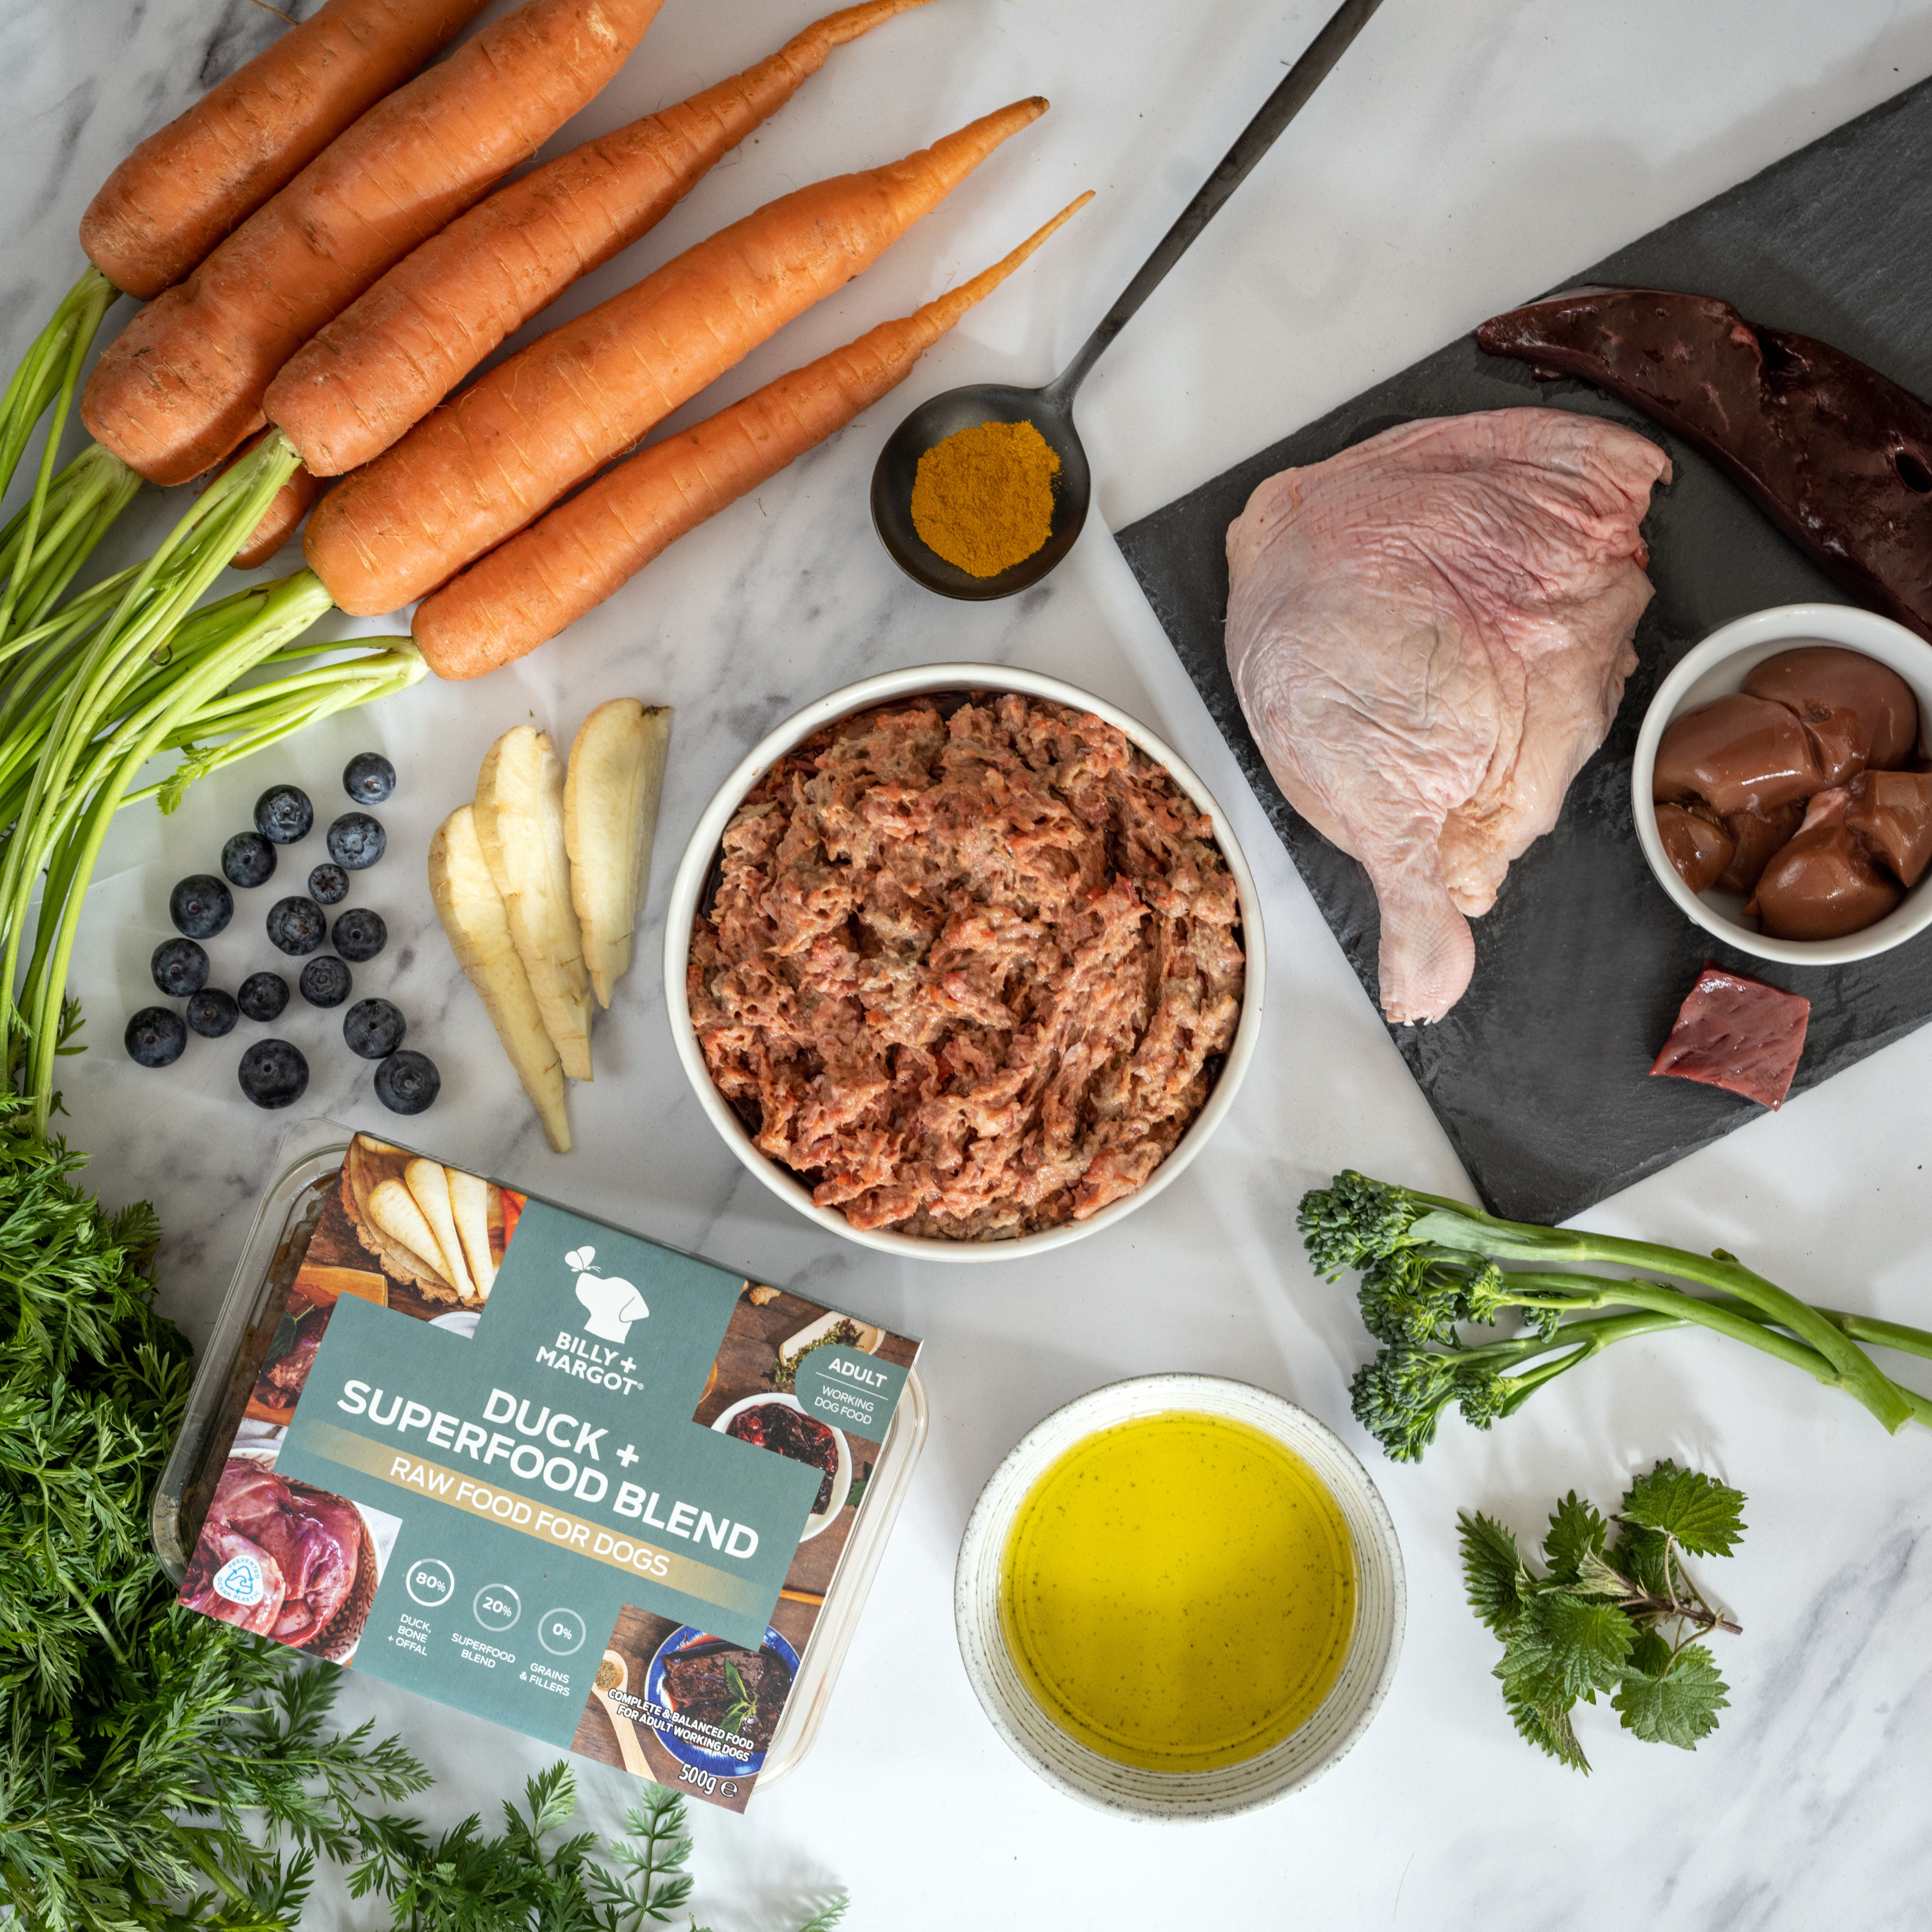 delicious and nutritious duck raw dog food ingredients including human grade meat, bone, offal, seasonal vegetables and our superfood blend. Grain free